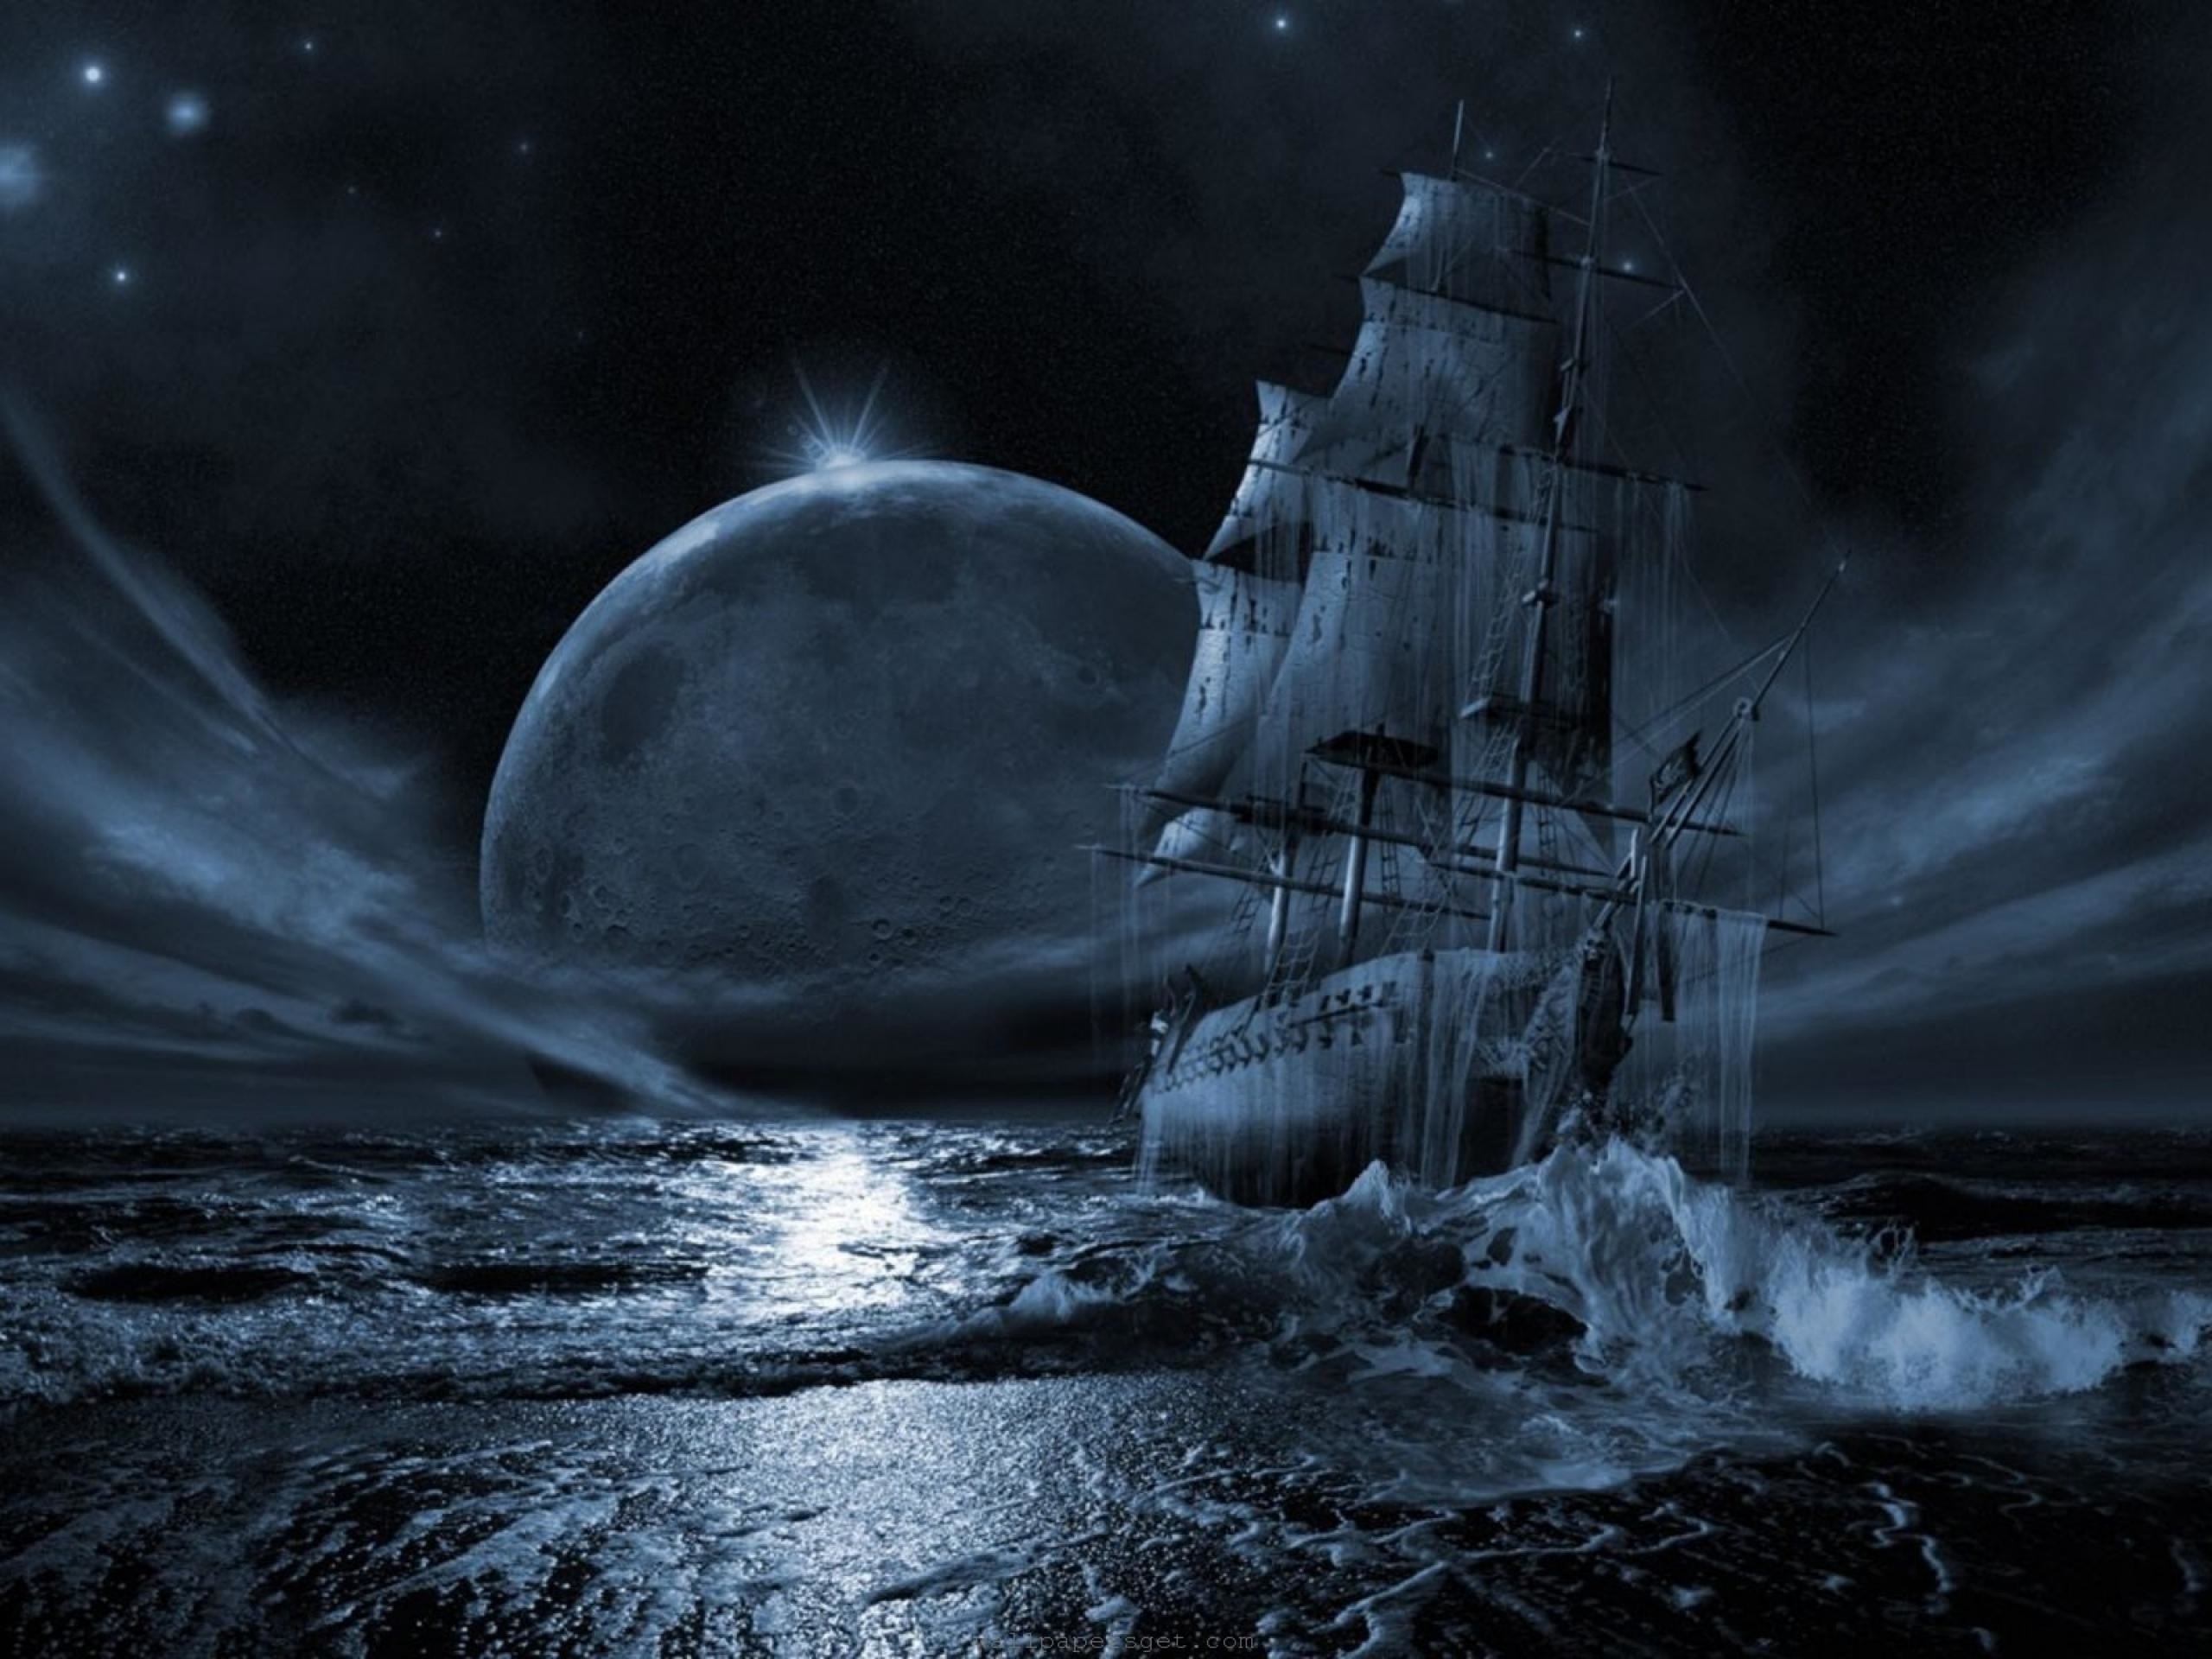 2560x1920 ship background. boat wallpaper backgrounds high definition ghost ship  largxjpg background titanic p